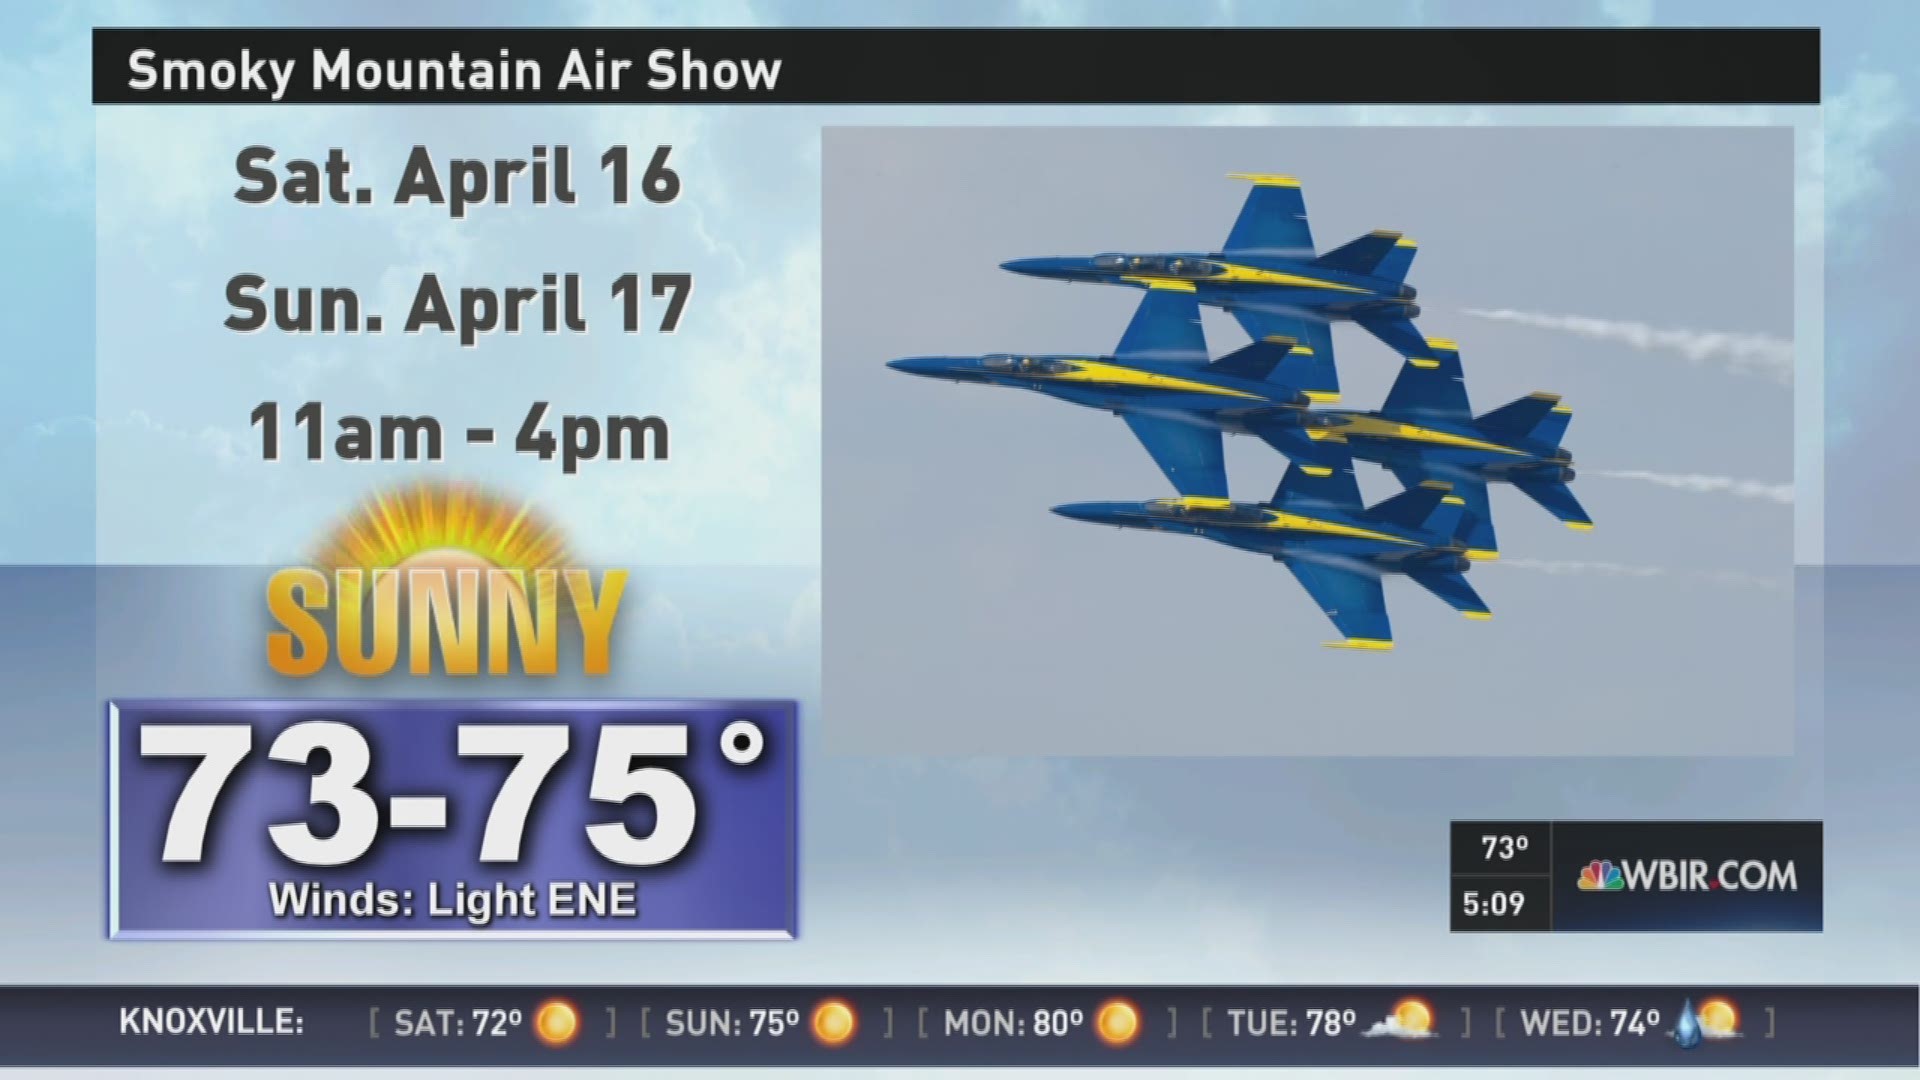 April 15, 2016 at 5 p.m. Todd brings us the weather from McGhee Tyson Air National Guard base